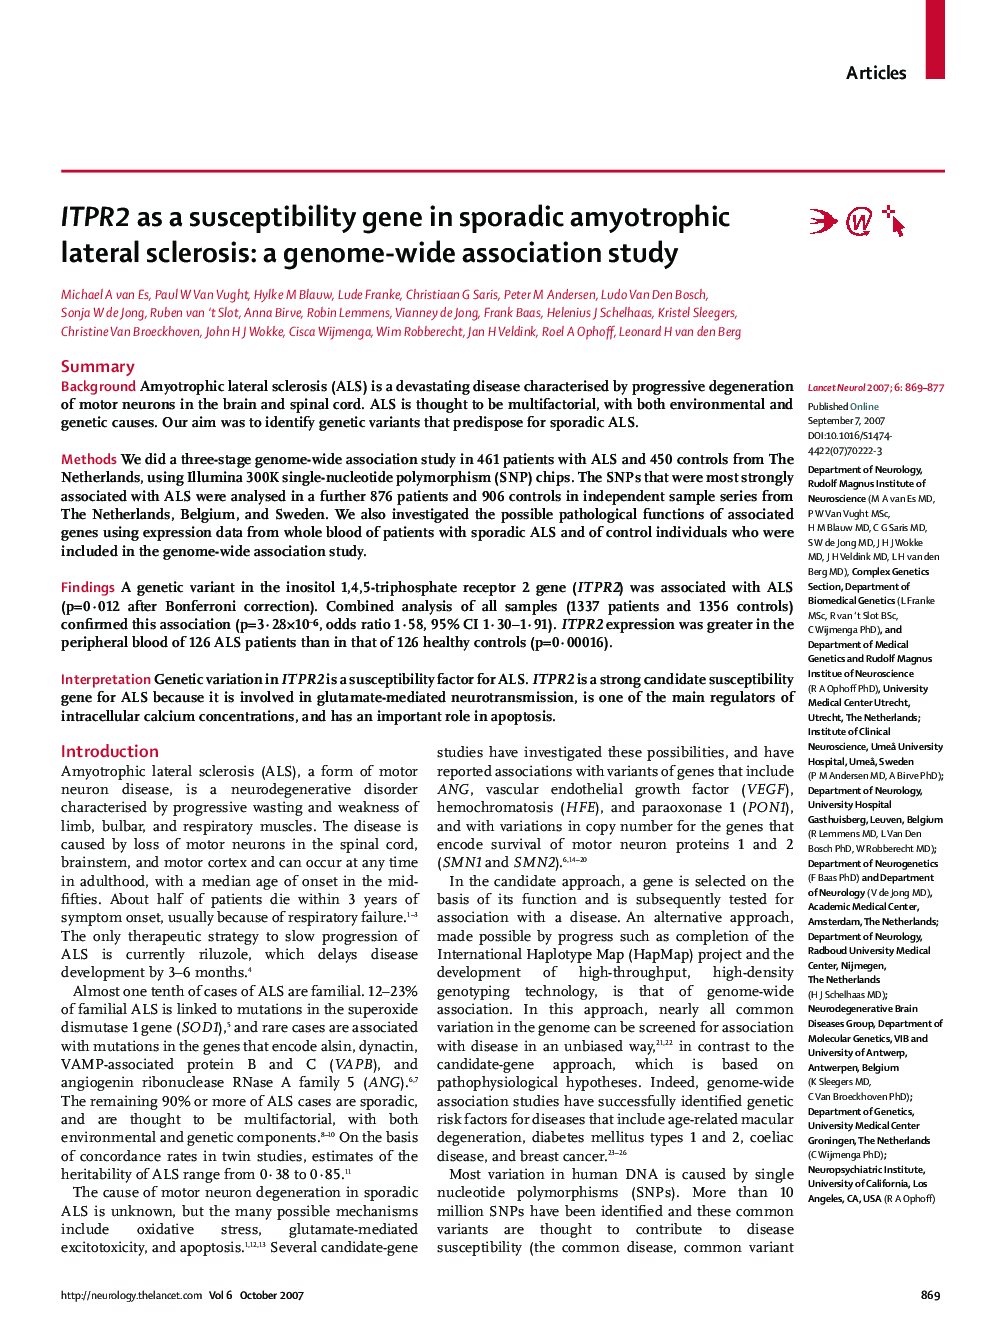 ITPR2 as a susceptibility gene in sporadic amyotrophic lateral sclerosis: a genome-wide association study